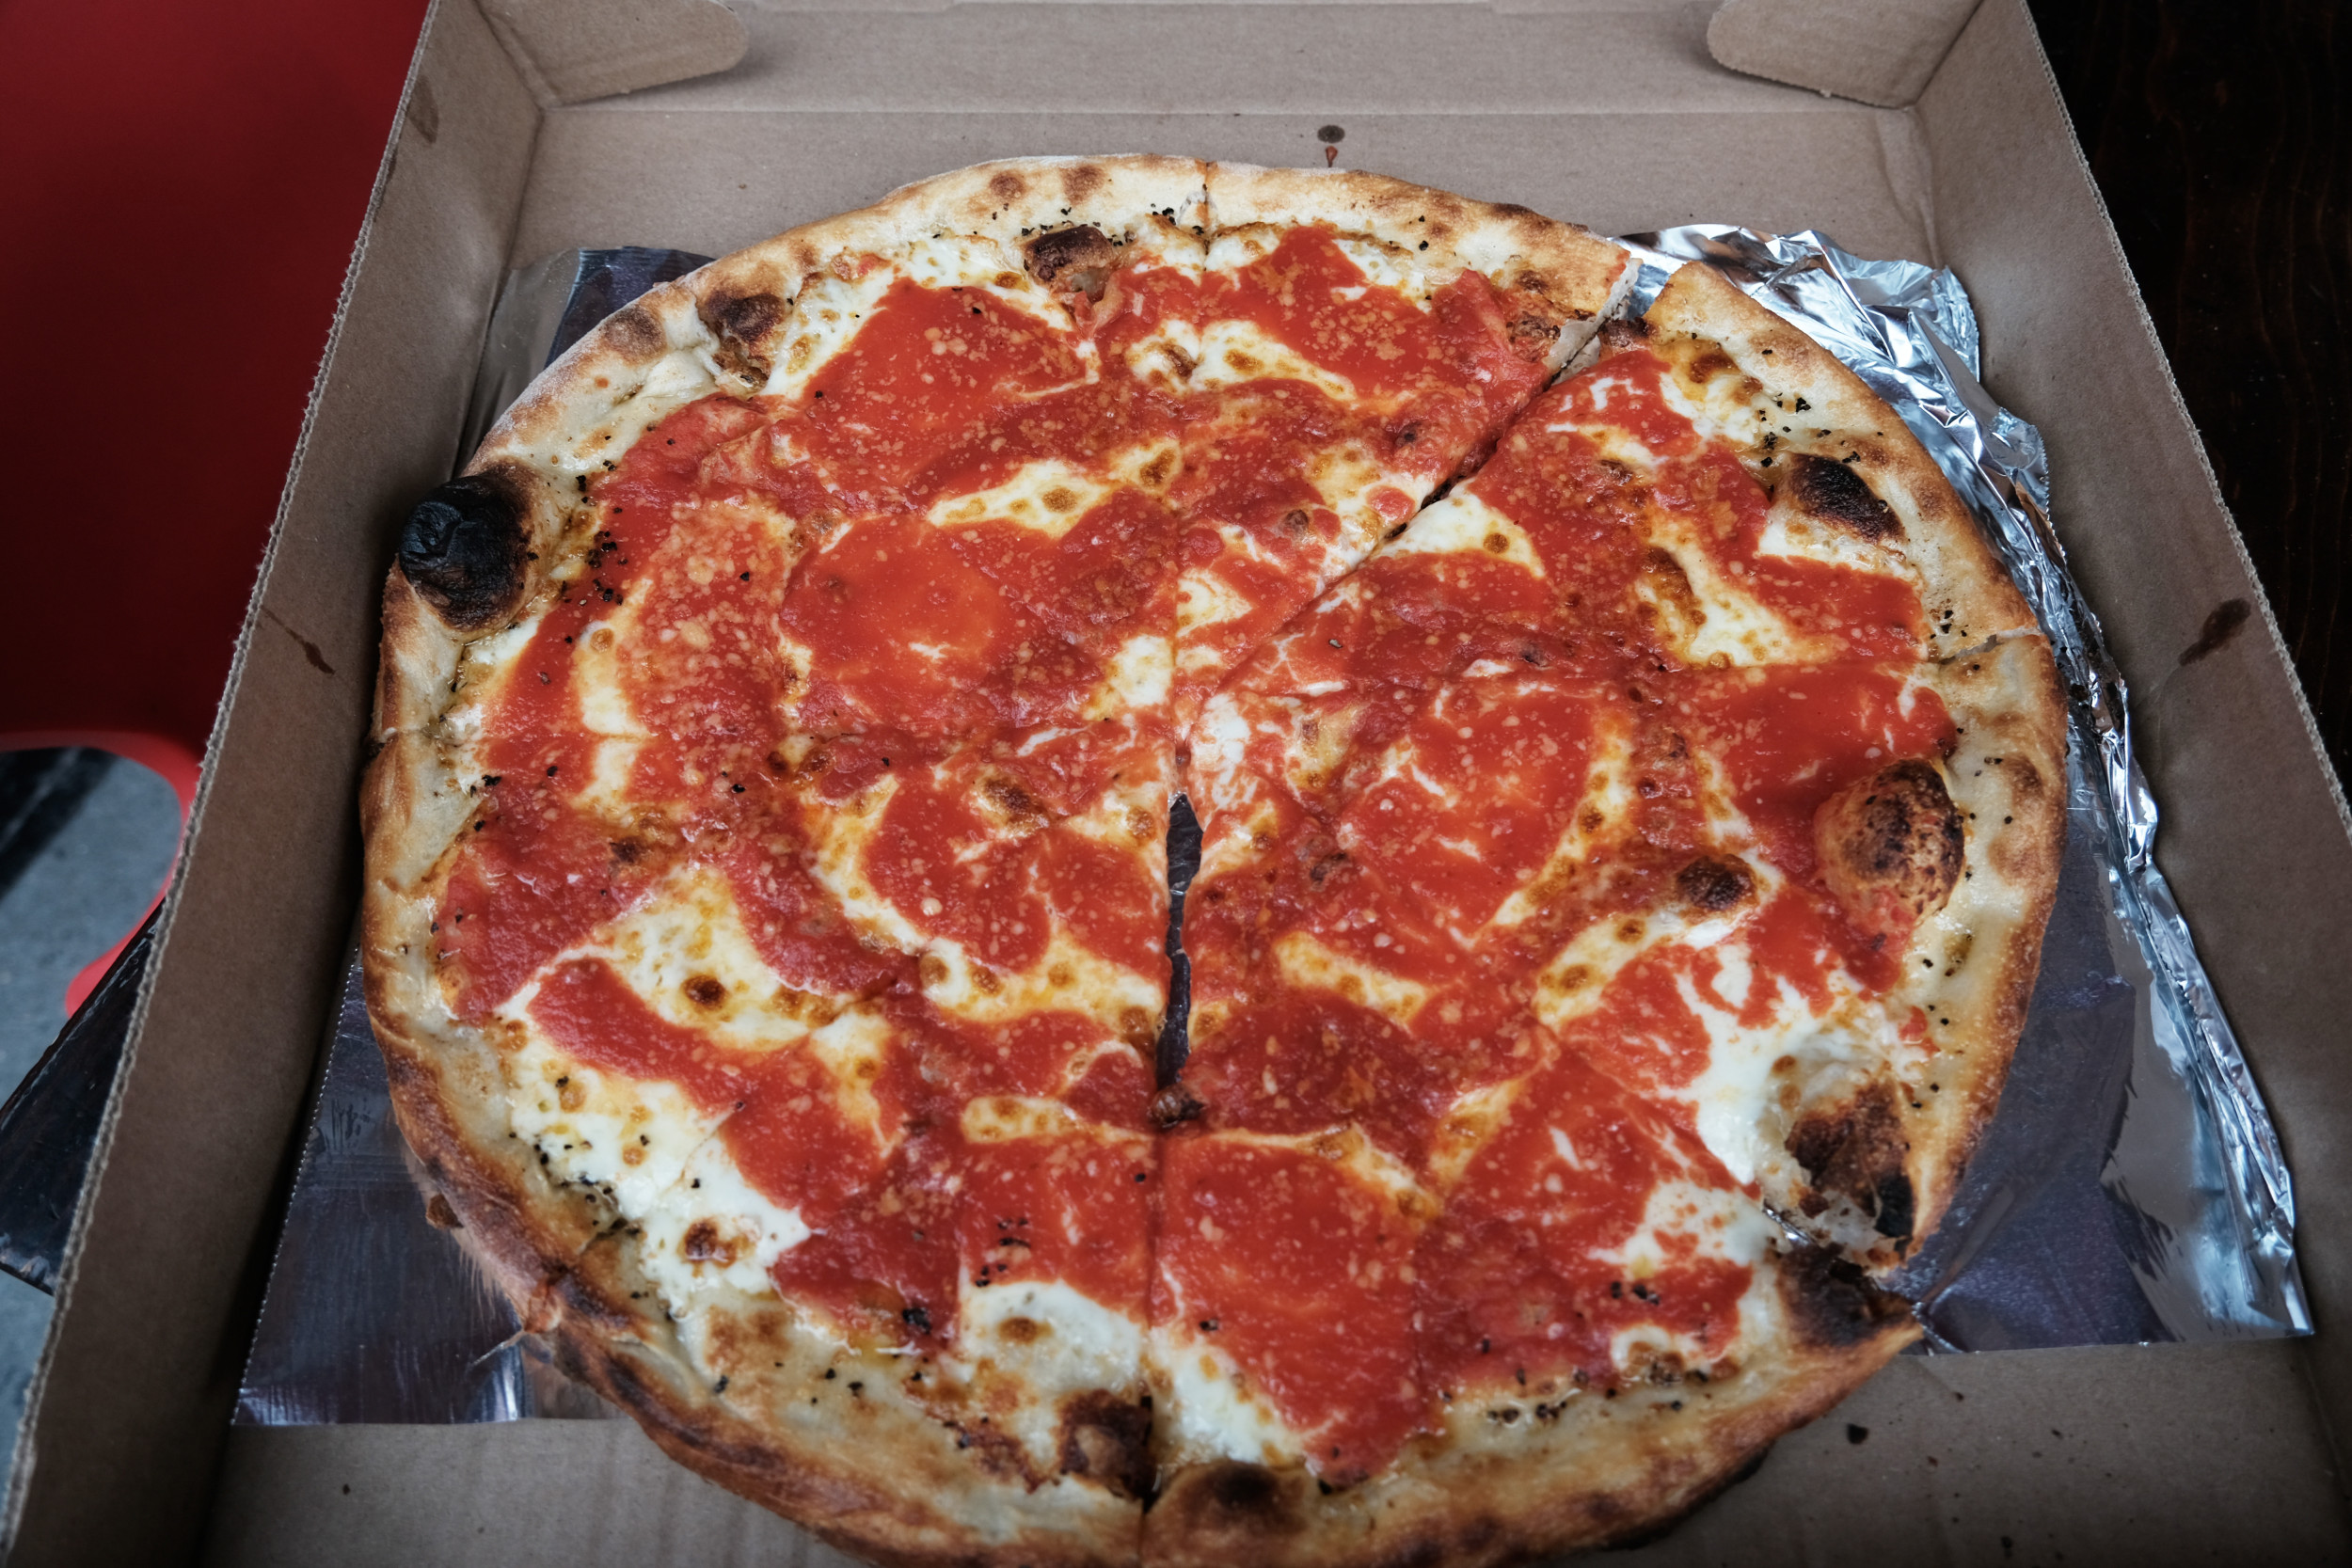 New York City Hall Pelted With Pizza in Anti-Woke Wood Oven Backlash